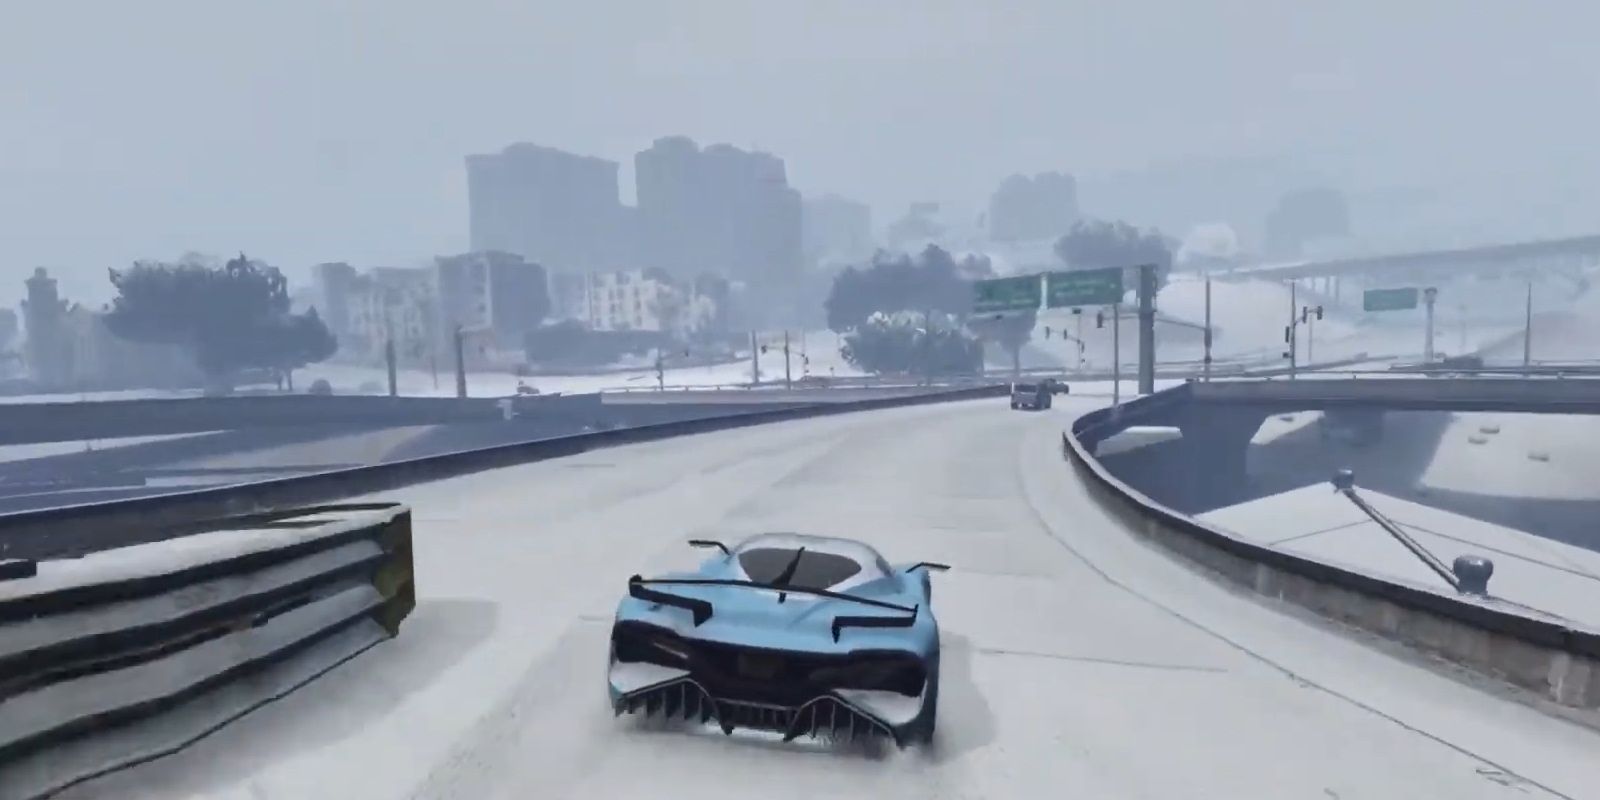 Is there snow in gta 5